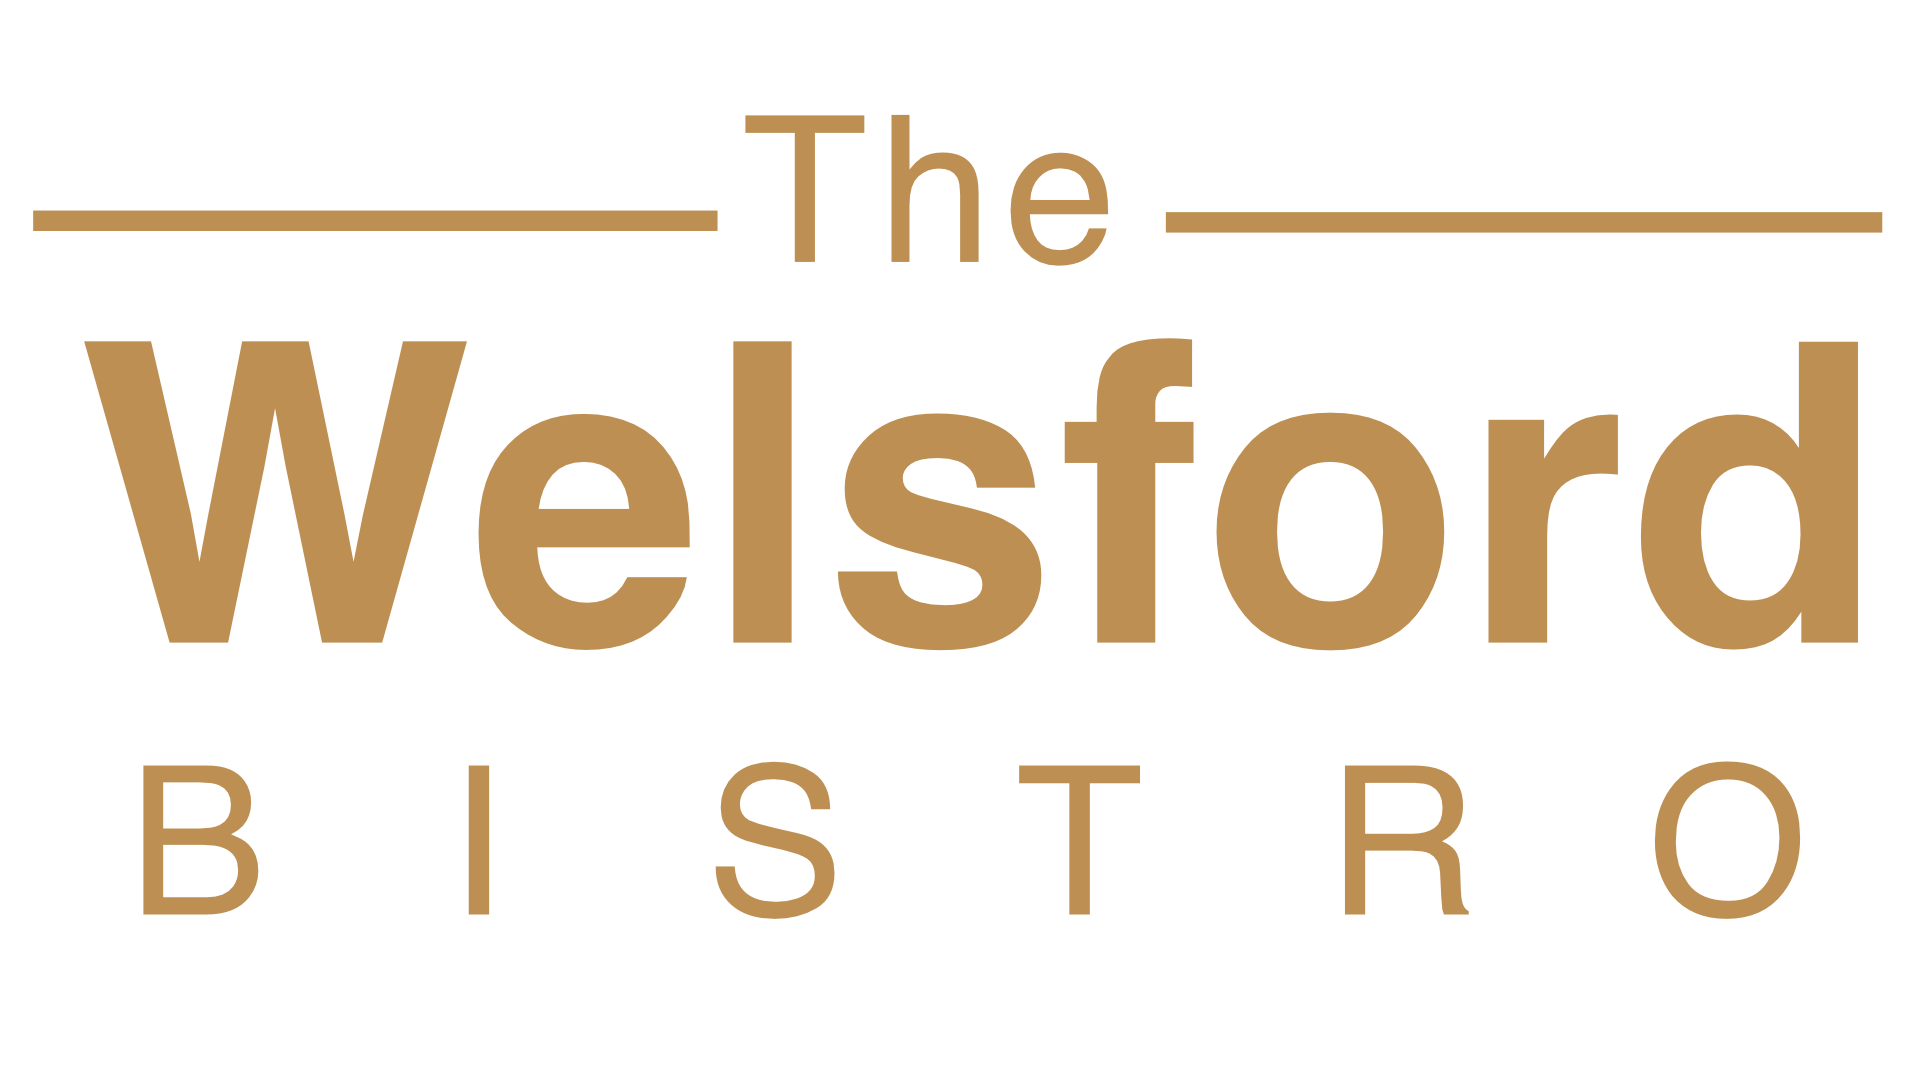 The Welsford Bistro